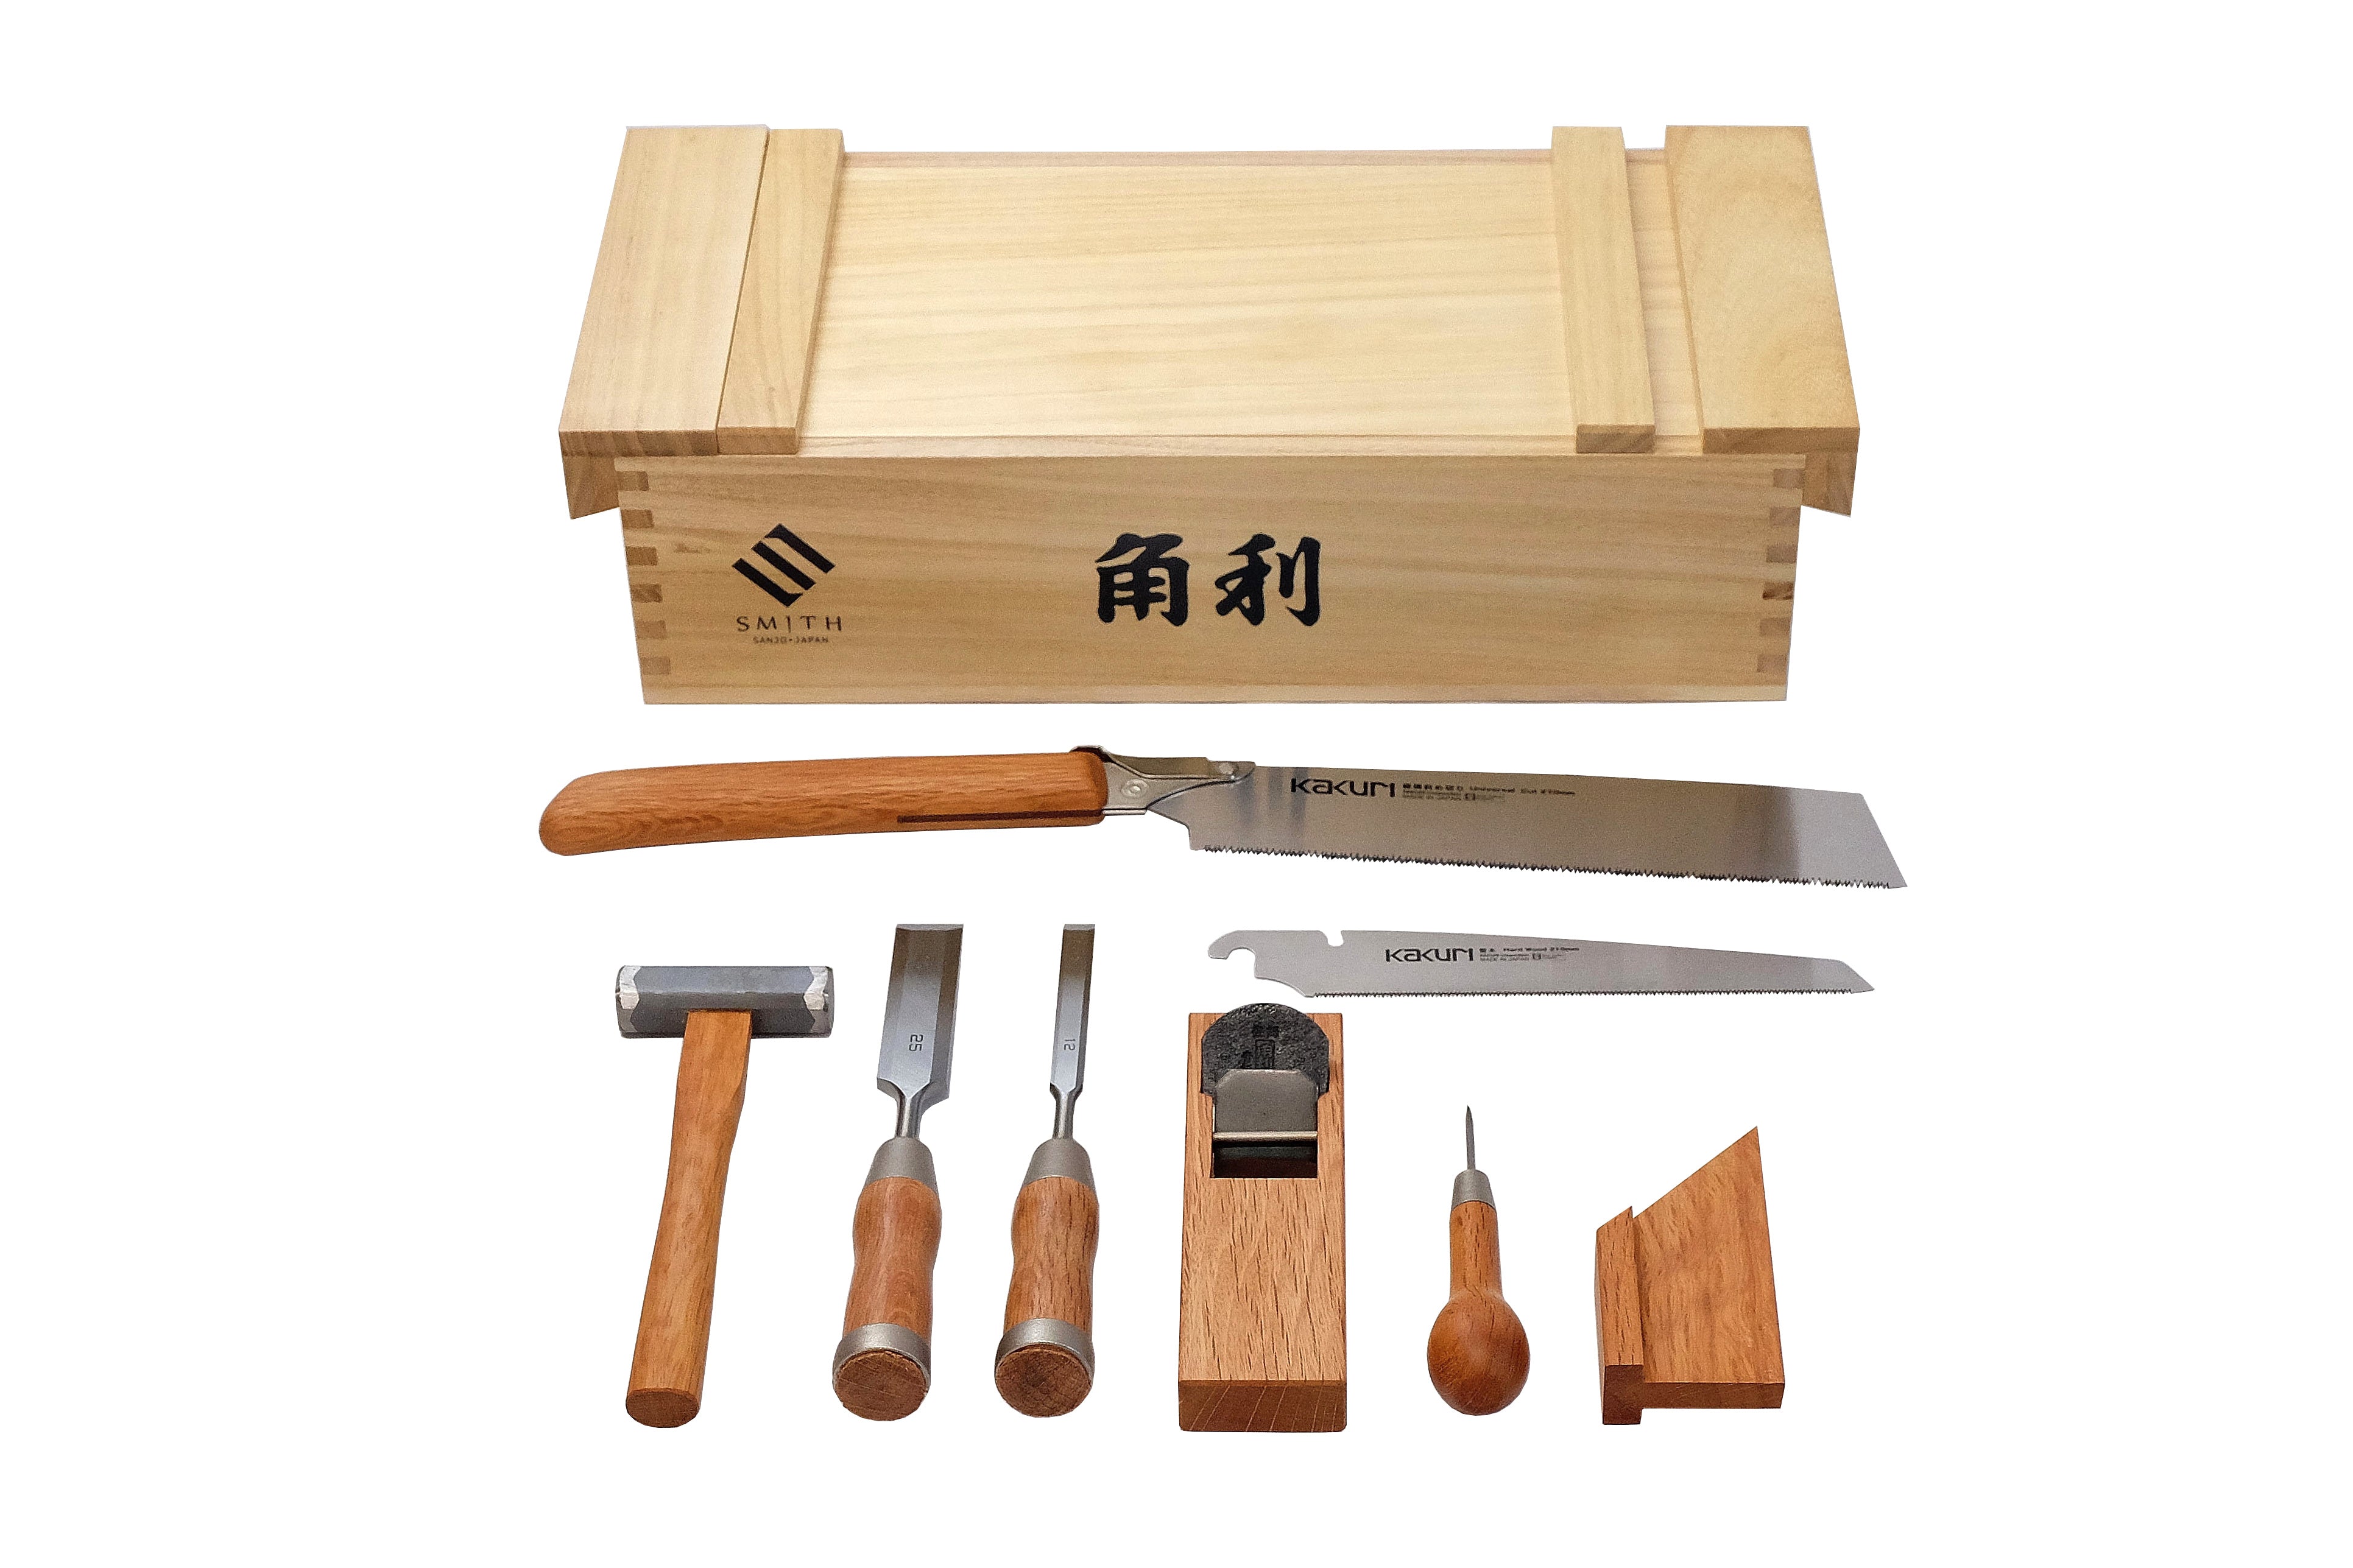 Japan Woodworker - Hand Tools, Gardening, and Fine Cutlery - Woodcraft